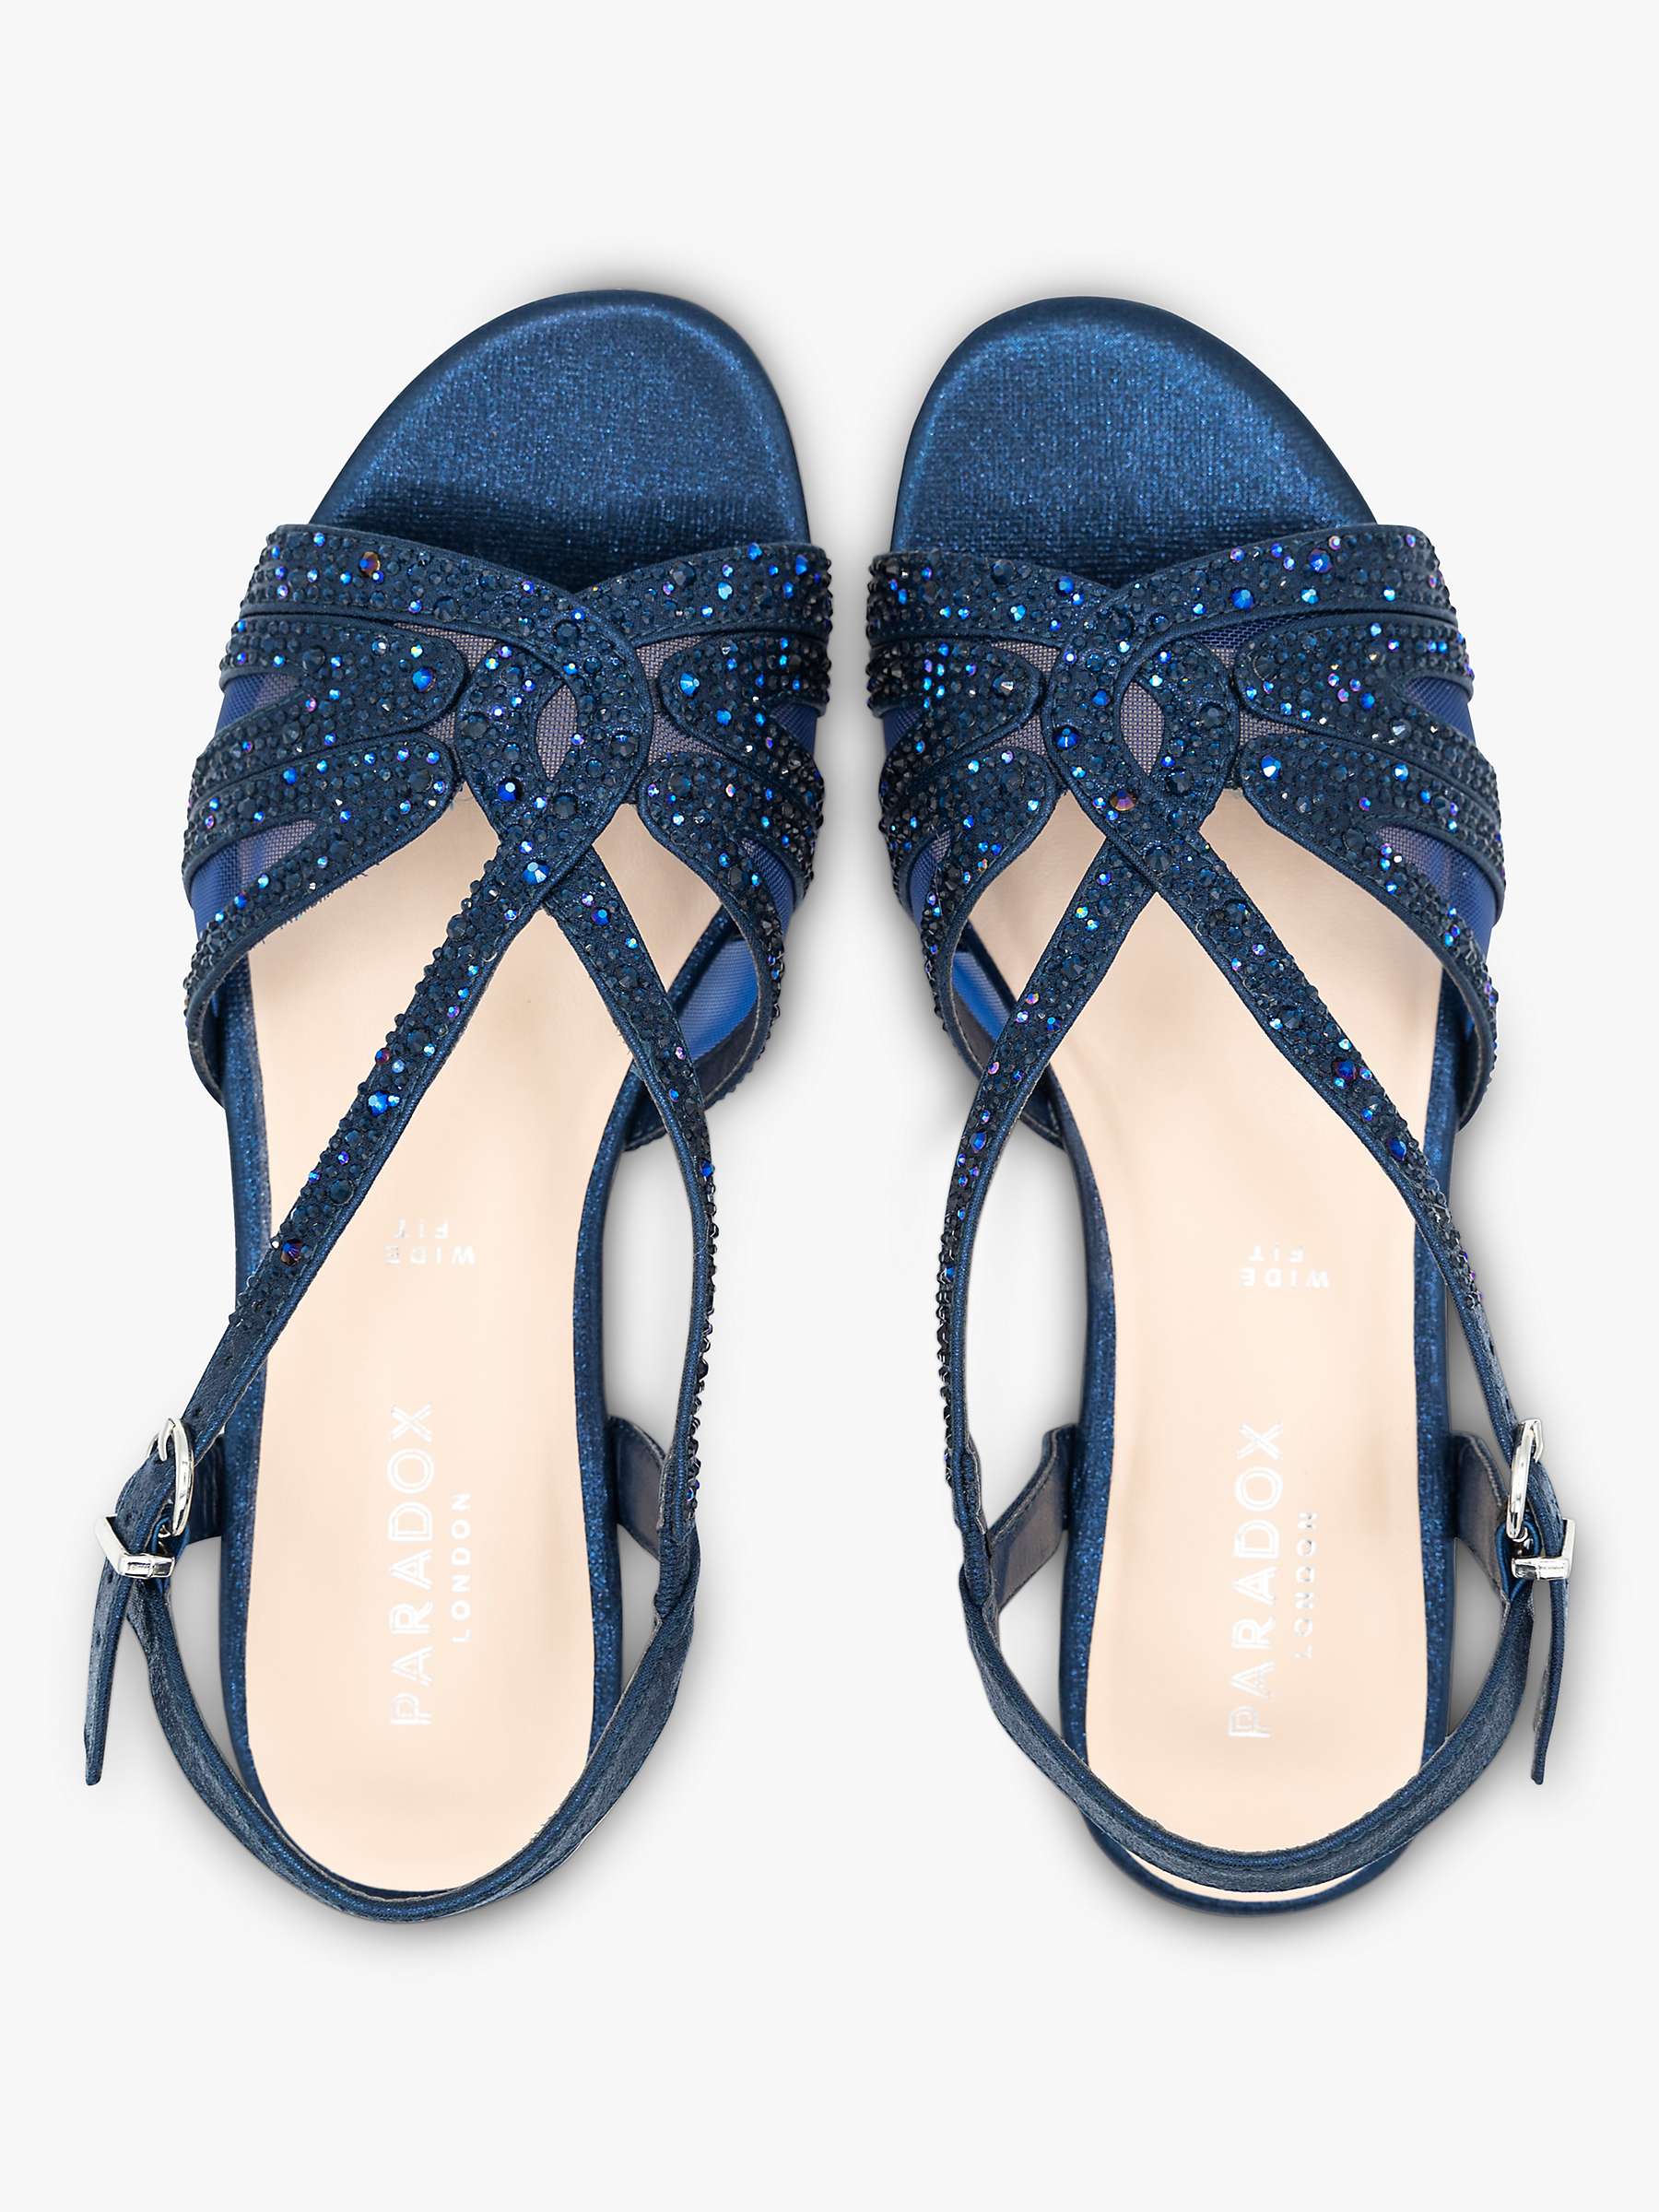 Buy Paradox London Quest Wide Fit Glitter Sandals Online at johnlewis.com